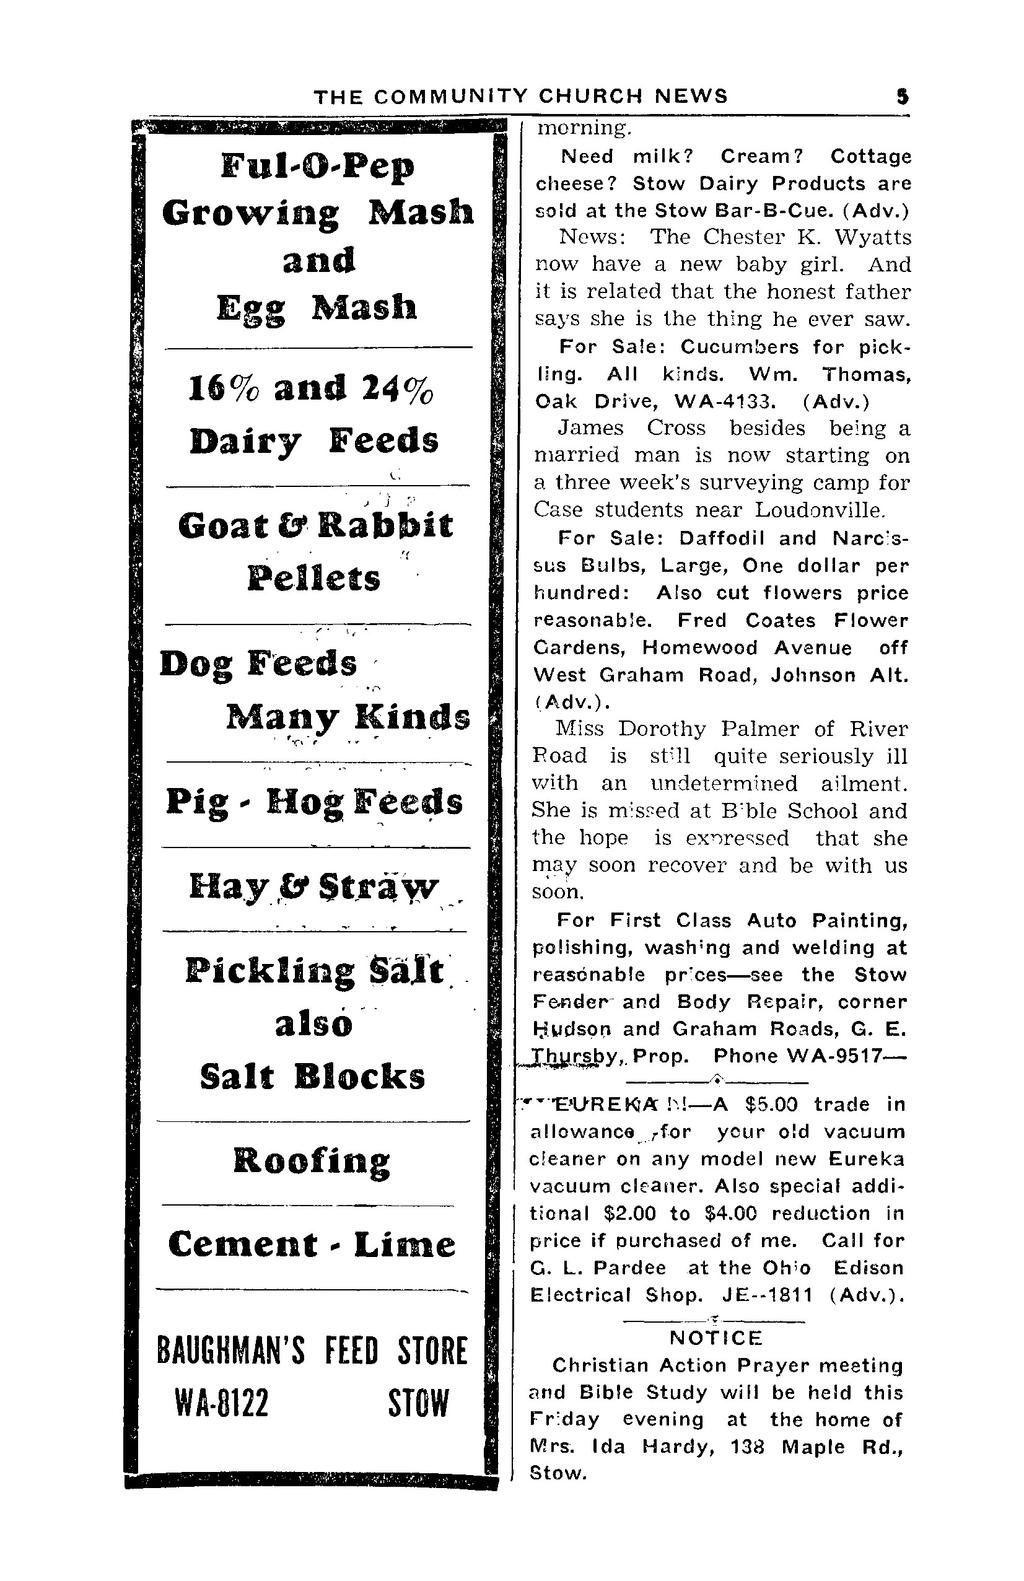 6 THE COMMUNITY CHURCH NEWS ^ Ful'O'Pep Growing Mash a n d Egg Mash 16% and 24% Dairy Feeds Goat & Rabbit Pellets ' Dog Feeds - Many Kinds Pig * Hog Feeds Hay.,& Strawy.